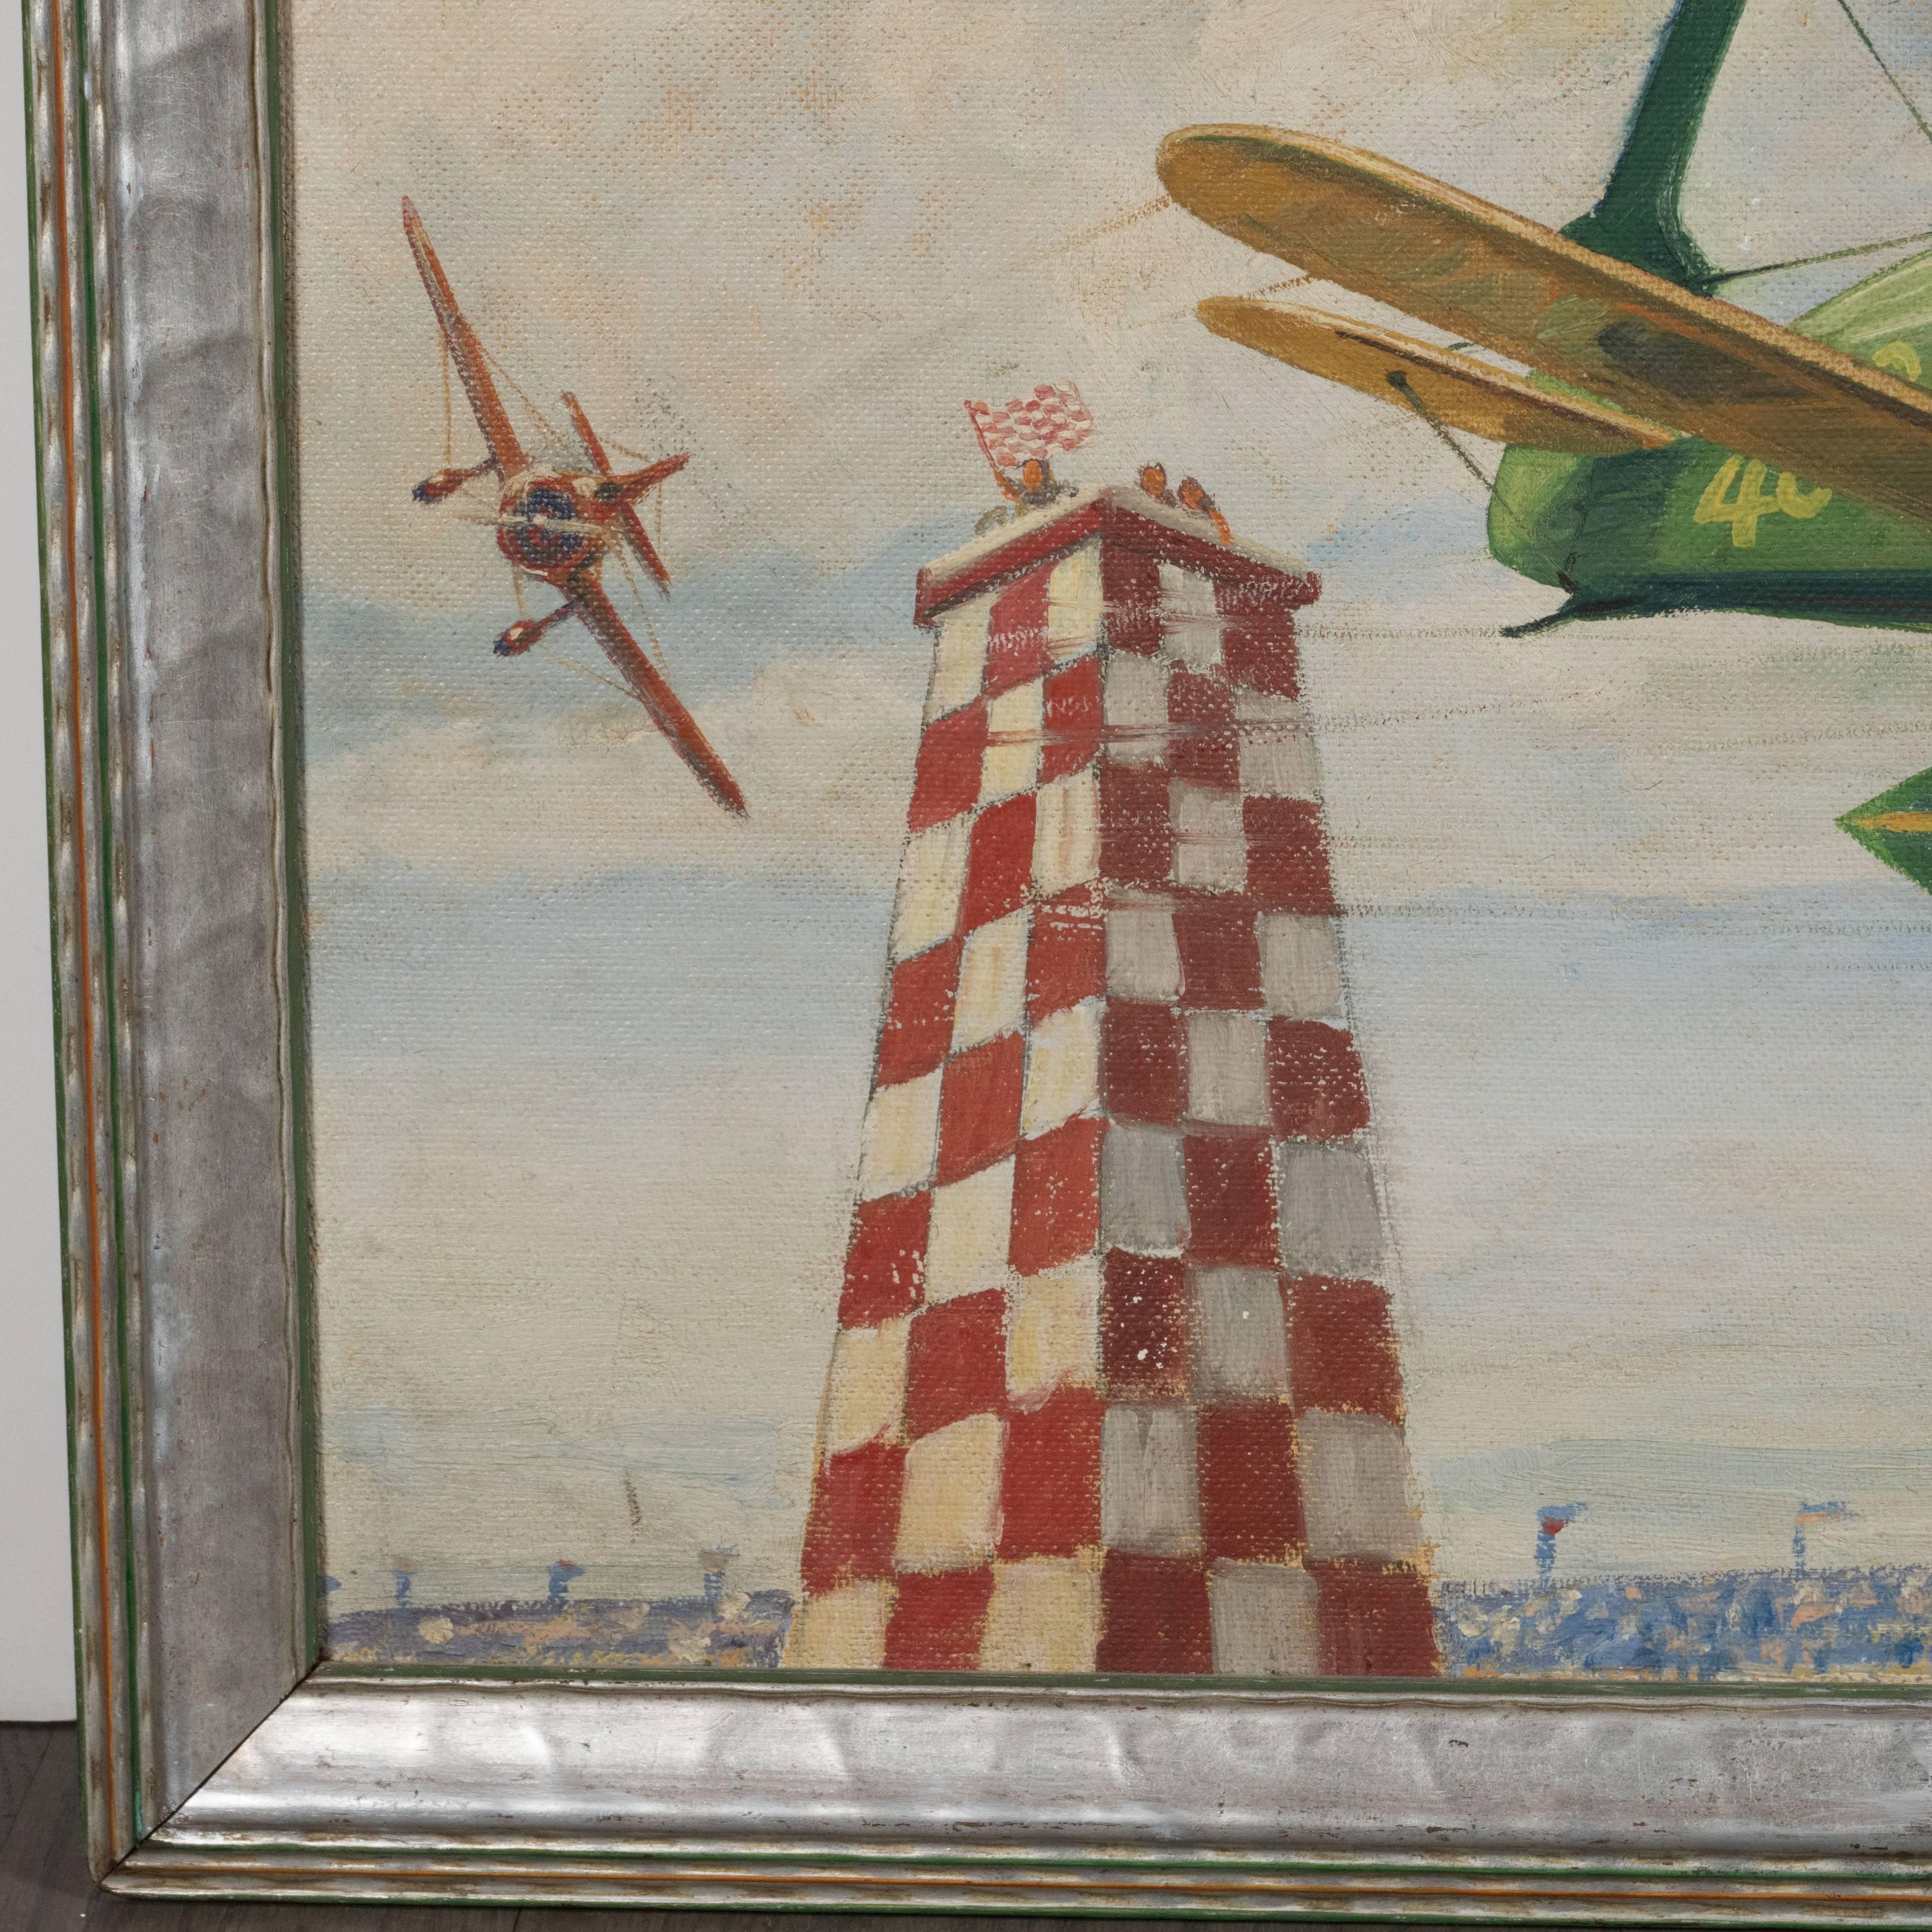 This oil on masonite painting captures the energy and excitement around aviation at the beginning of the 20th century in America. This work was realized by Charles Hubbell in 1931, a visual artist who was renowned for his aviation themed paintings.